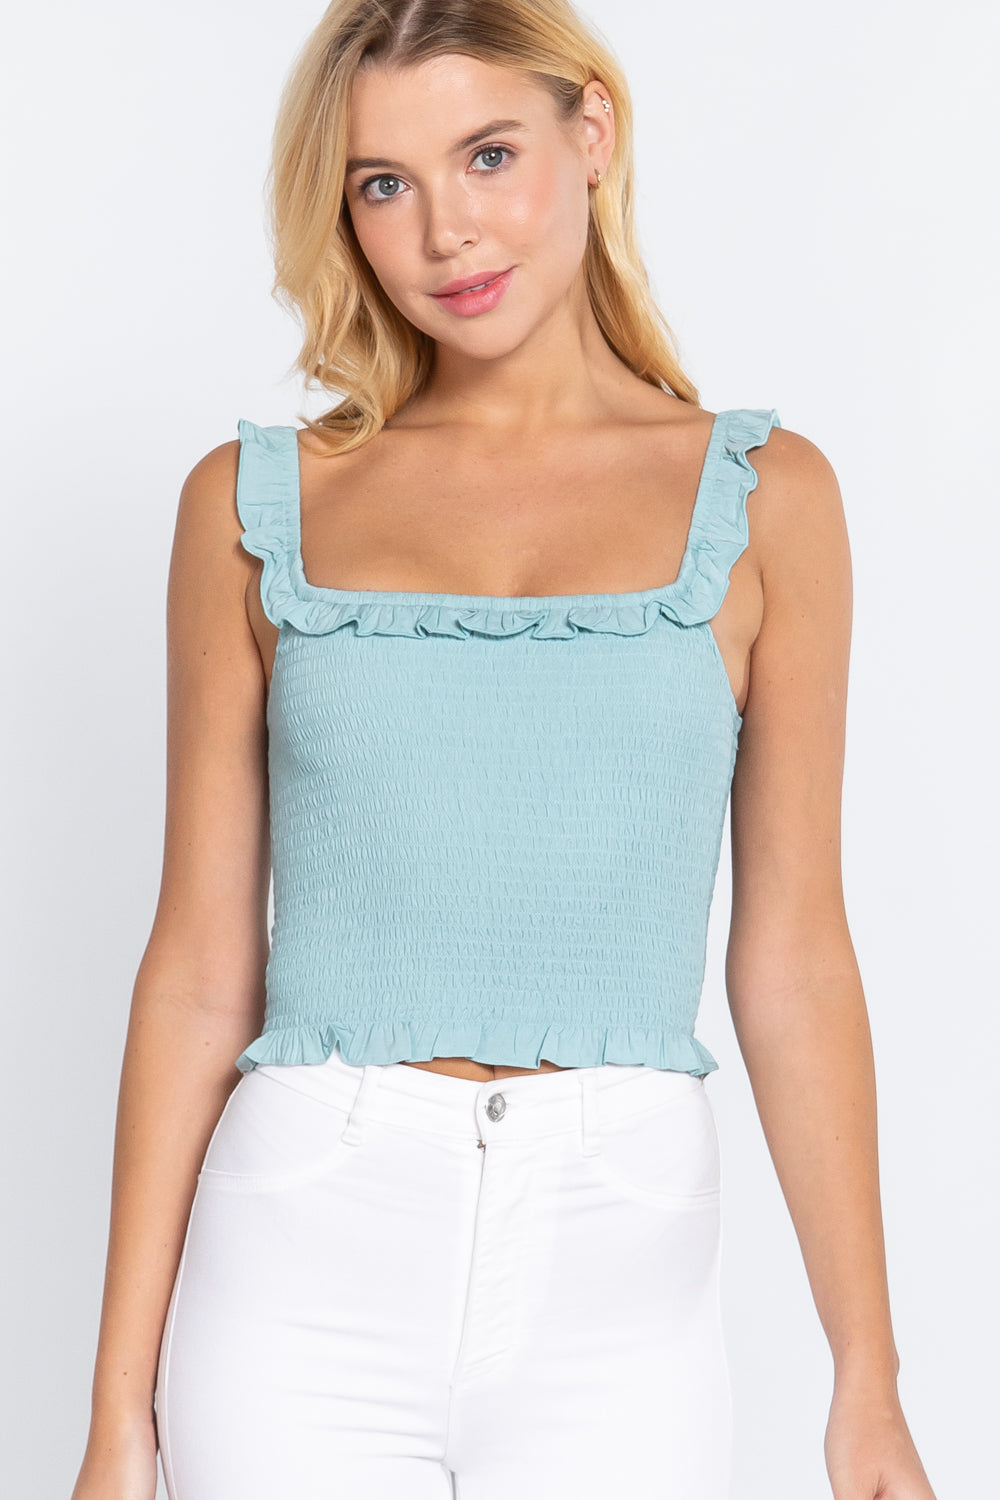 MINT - Smocking Ruffle Cami Woven Top - Ships from The US - womens shirts at TFC&H Co.